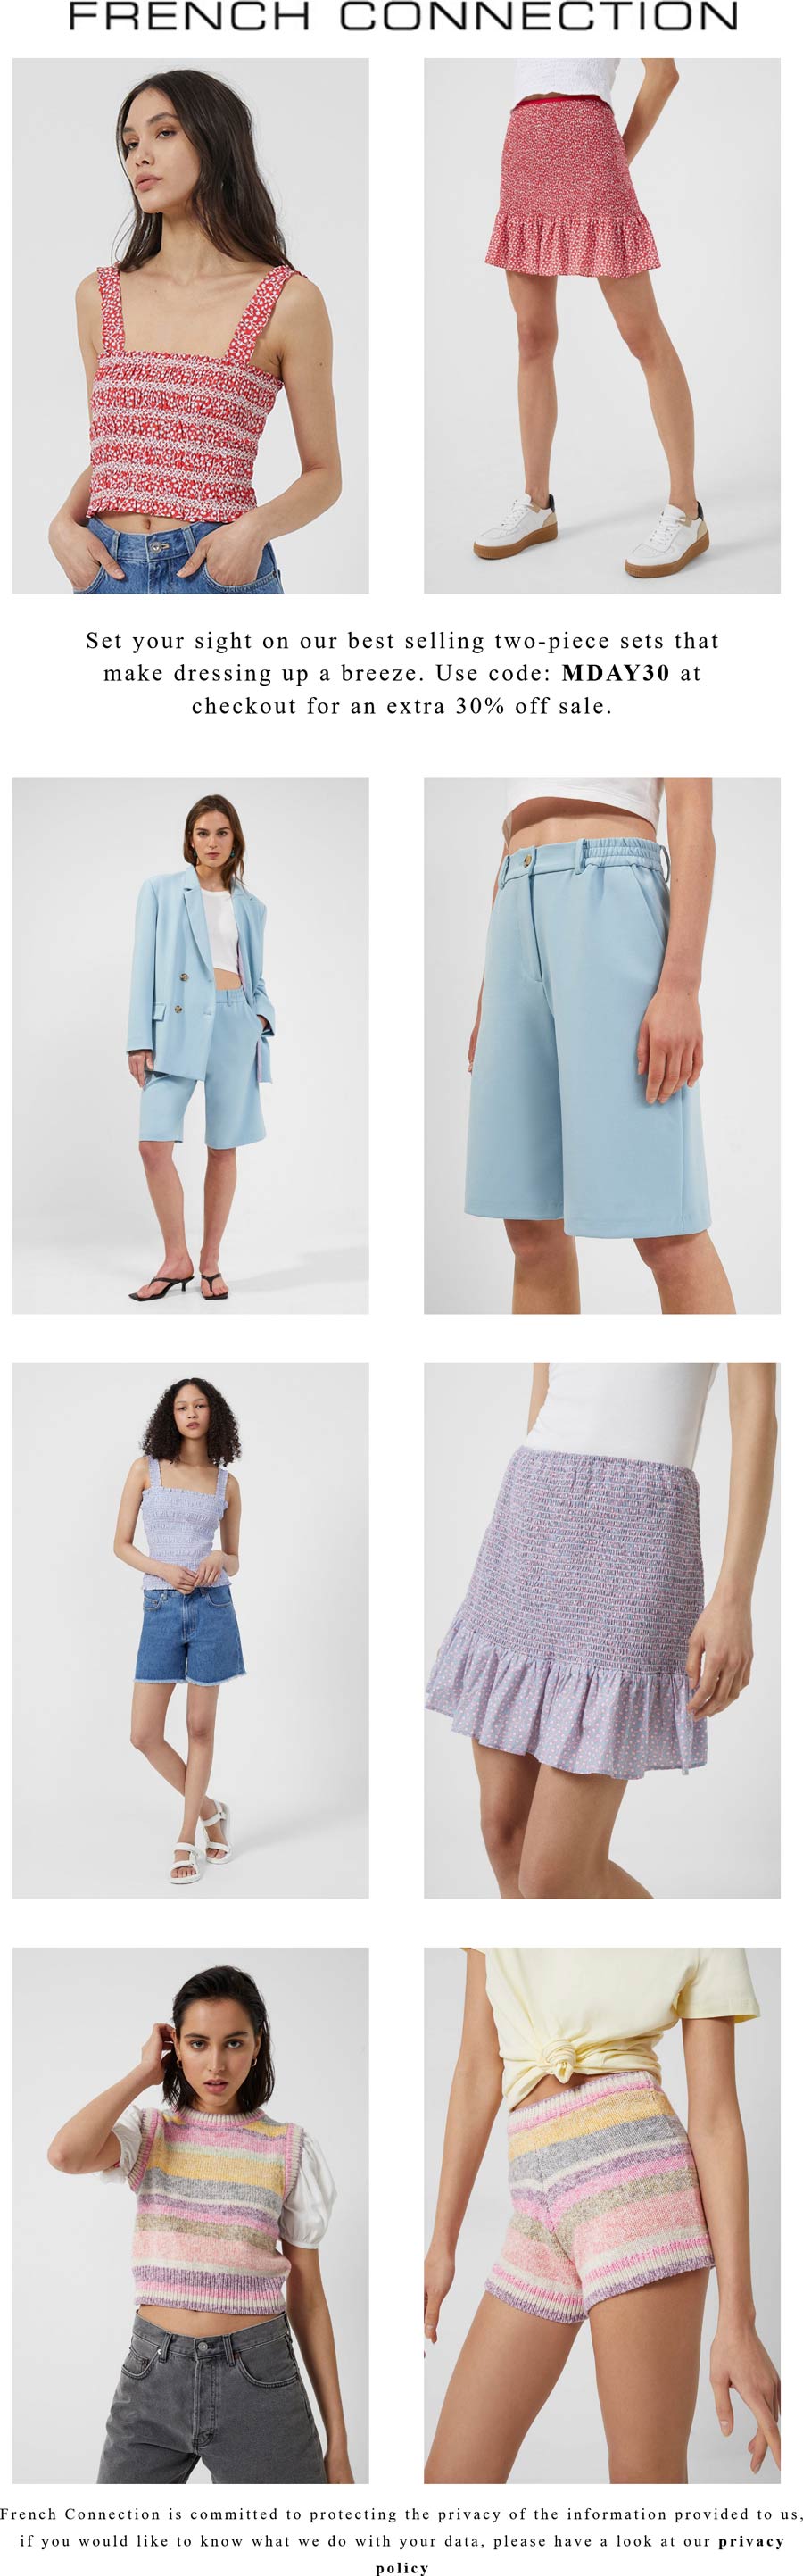 French Connection stores Coupon  Extra 30% off sale items at French Connection via promo code MDAY30 #frenchconnection 